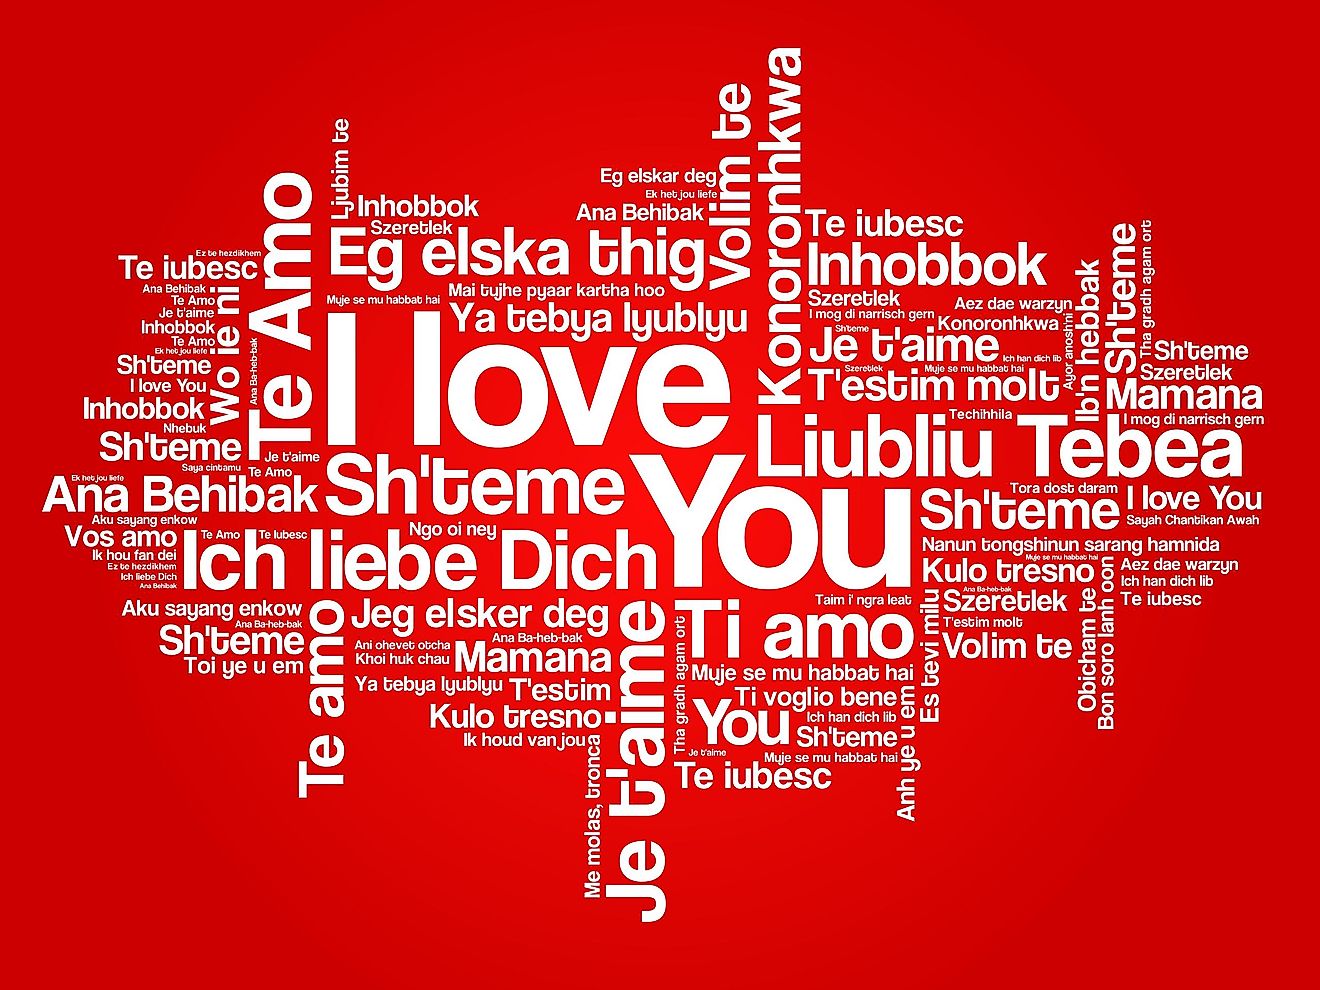 "I love you" in a variety of languages. 